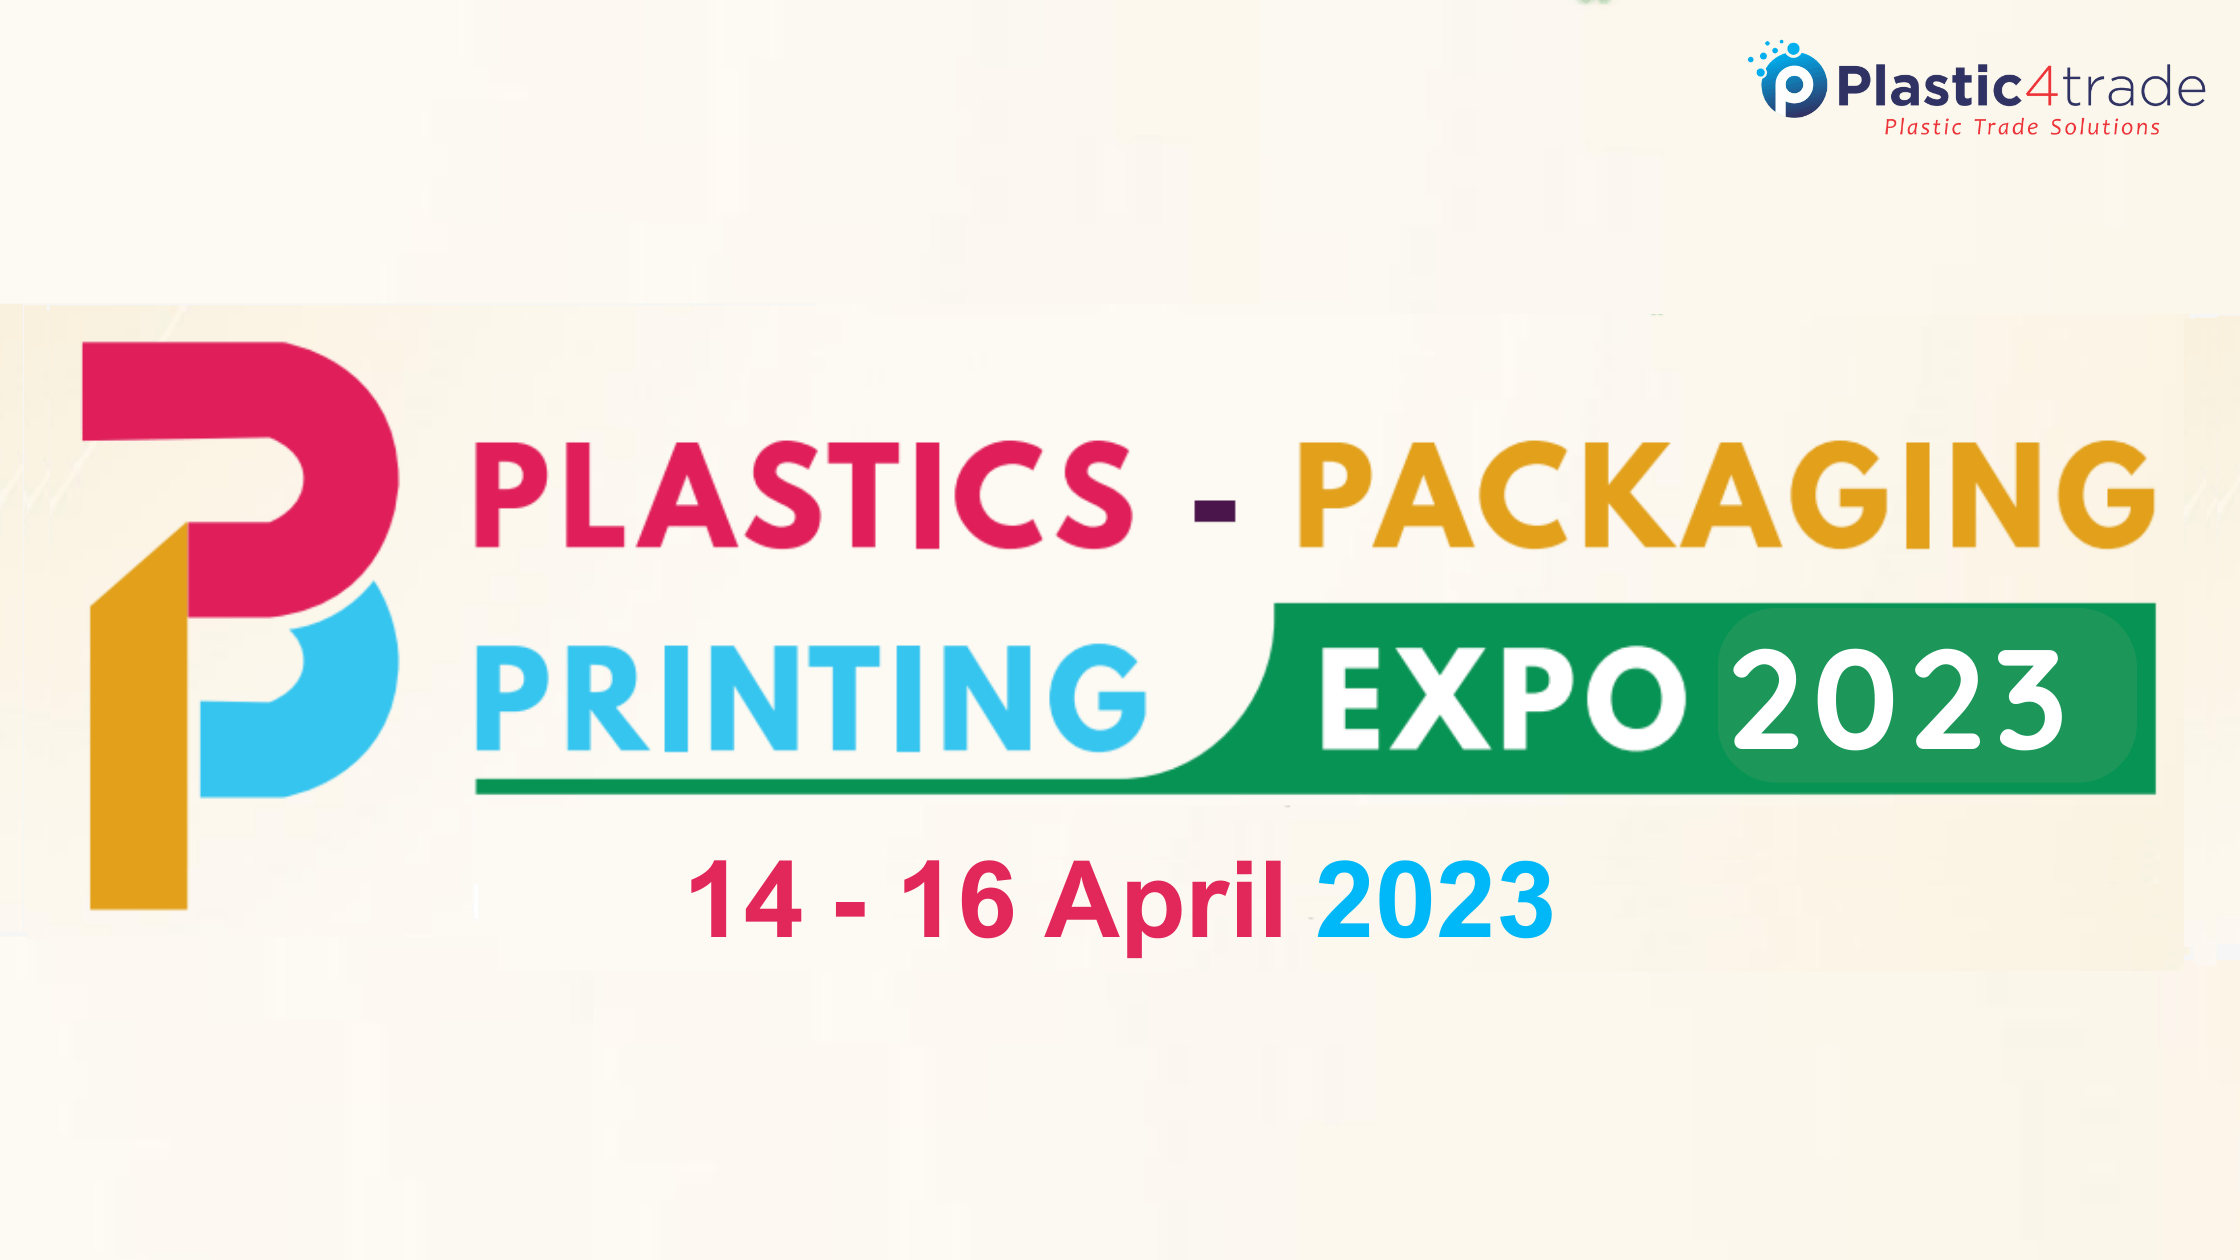 P3 Plastics, Packaging and Printing Exhibition 2023 Plastic4trade